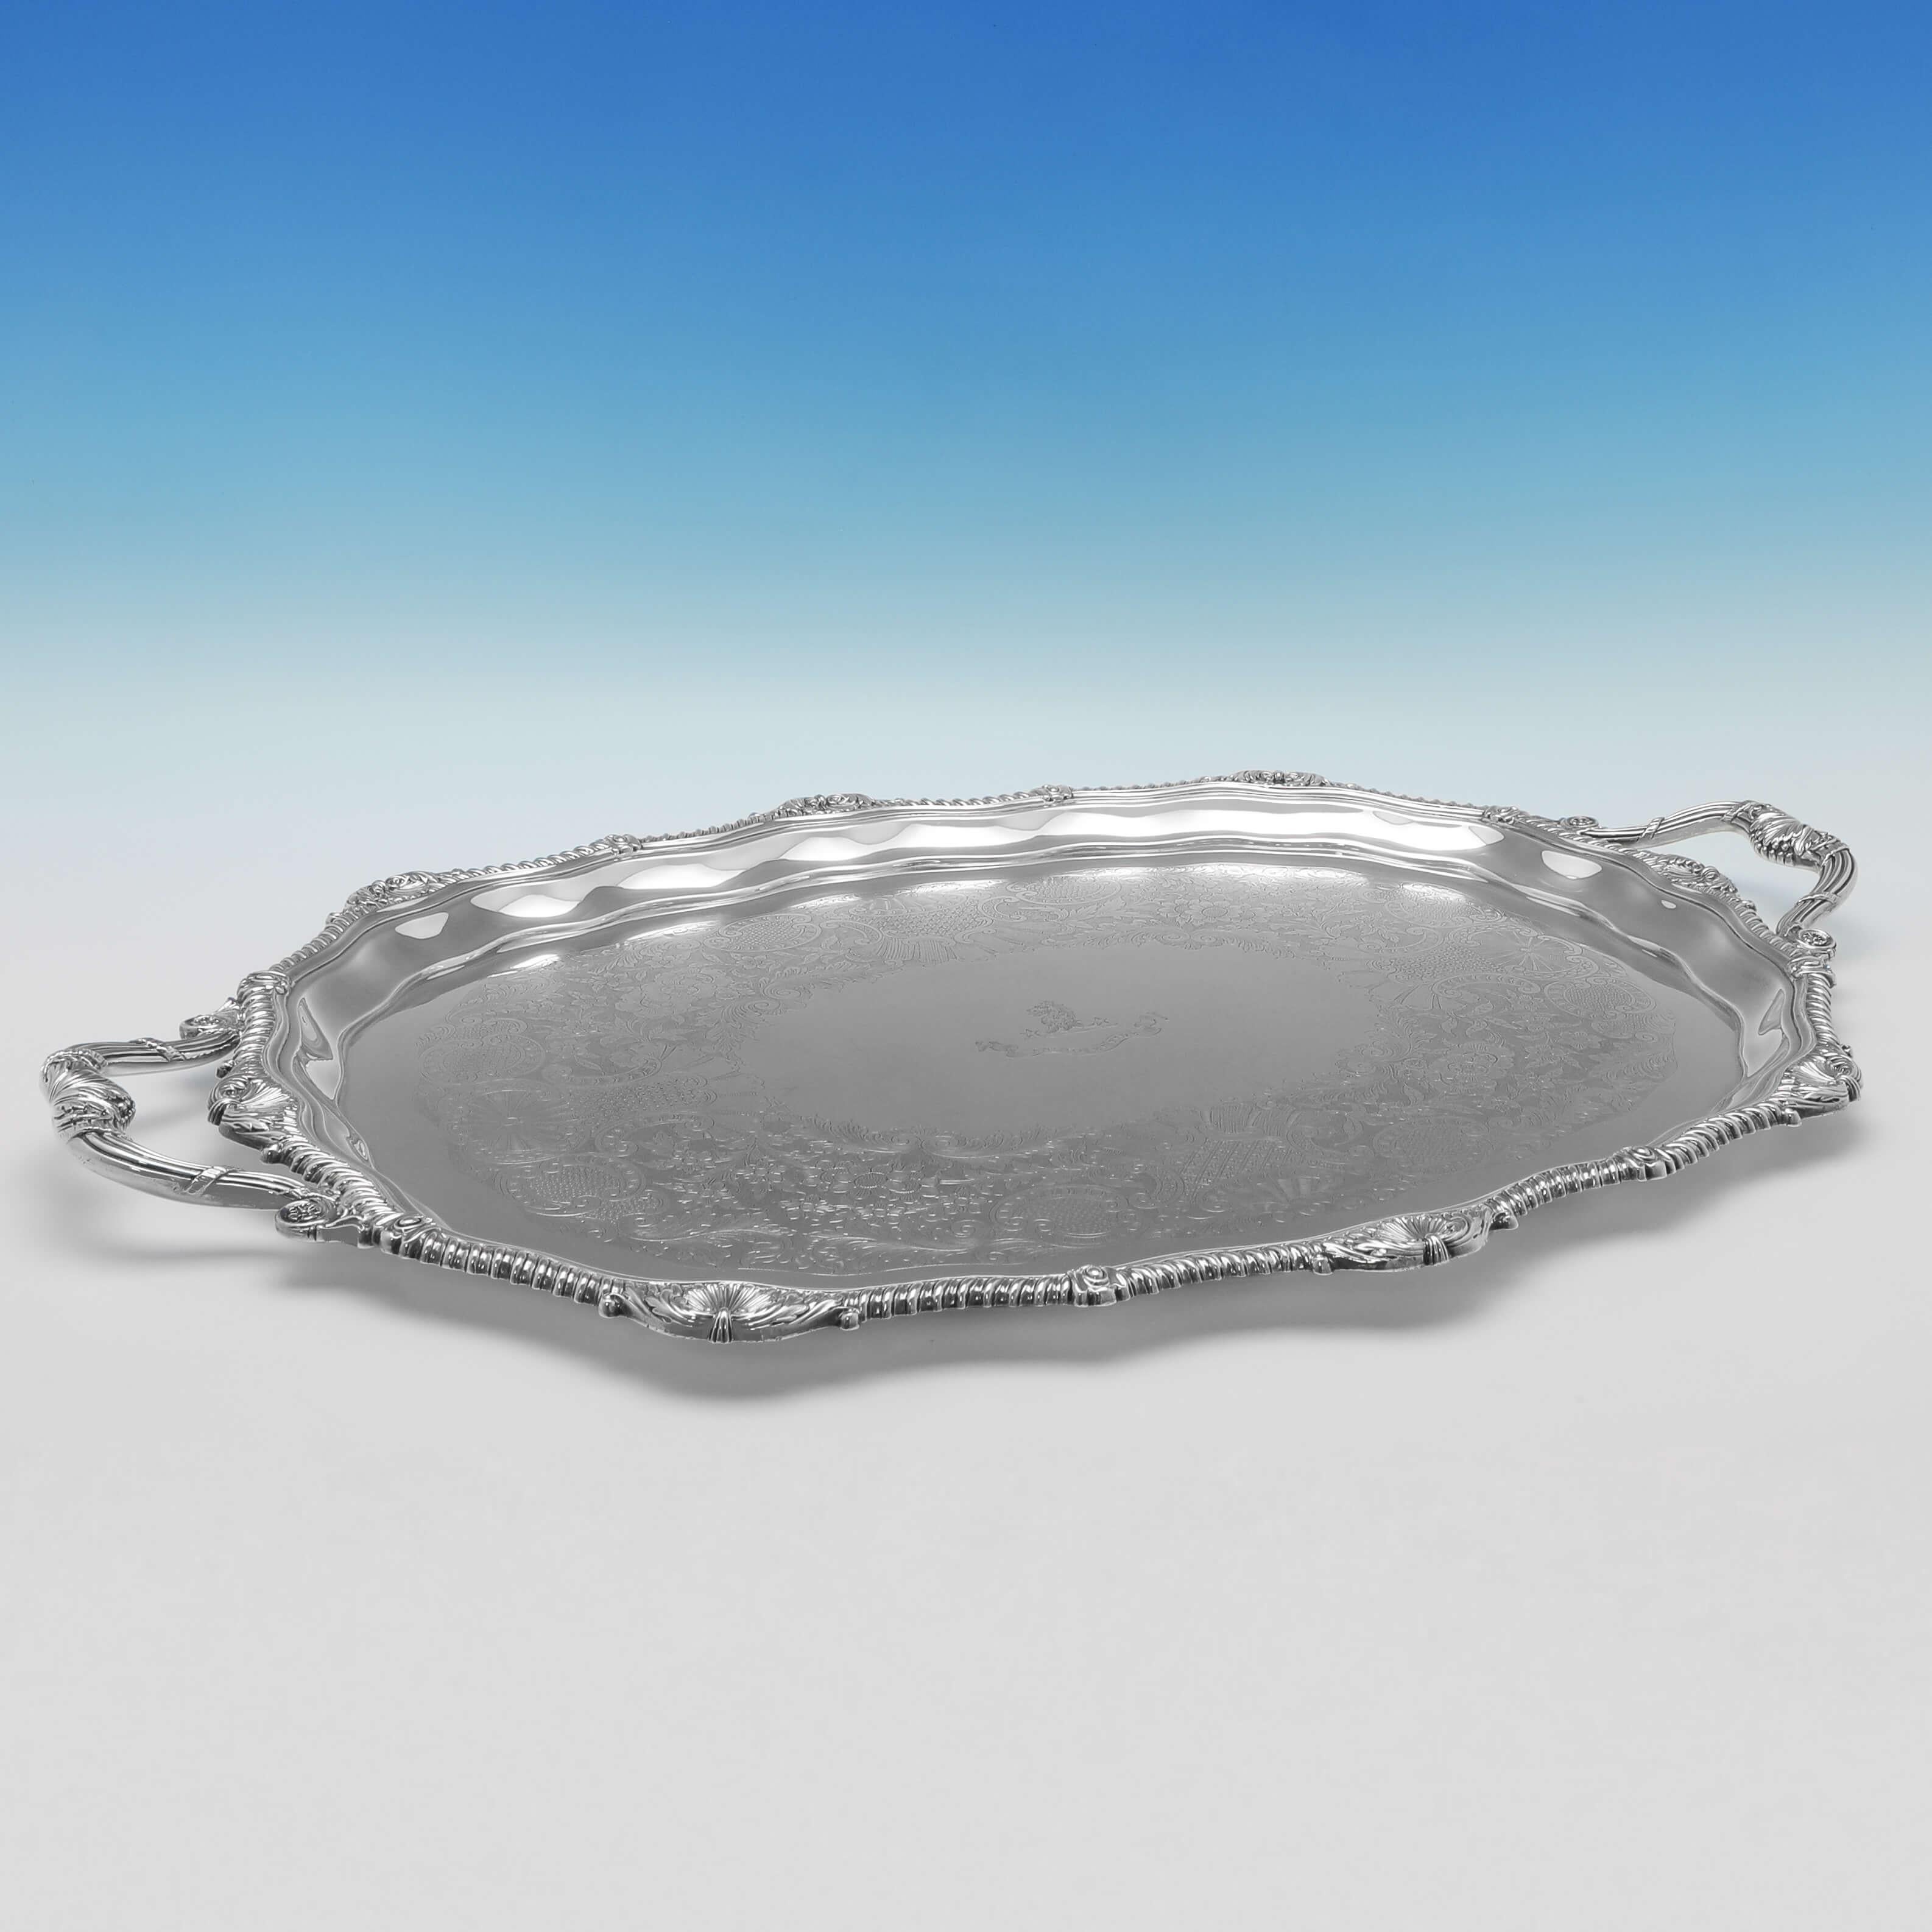 Hallmarked in London in 1905 by Hawksworth Eyres & Co, this heavy, Edwardian, antique Sterling Silver Tray, features flat chased floral and scroll decoration to the body with a shaped shell and gadroon border, and an engraved crest and motto to the